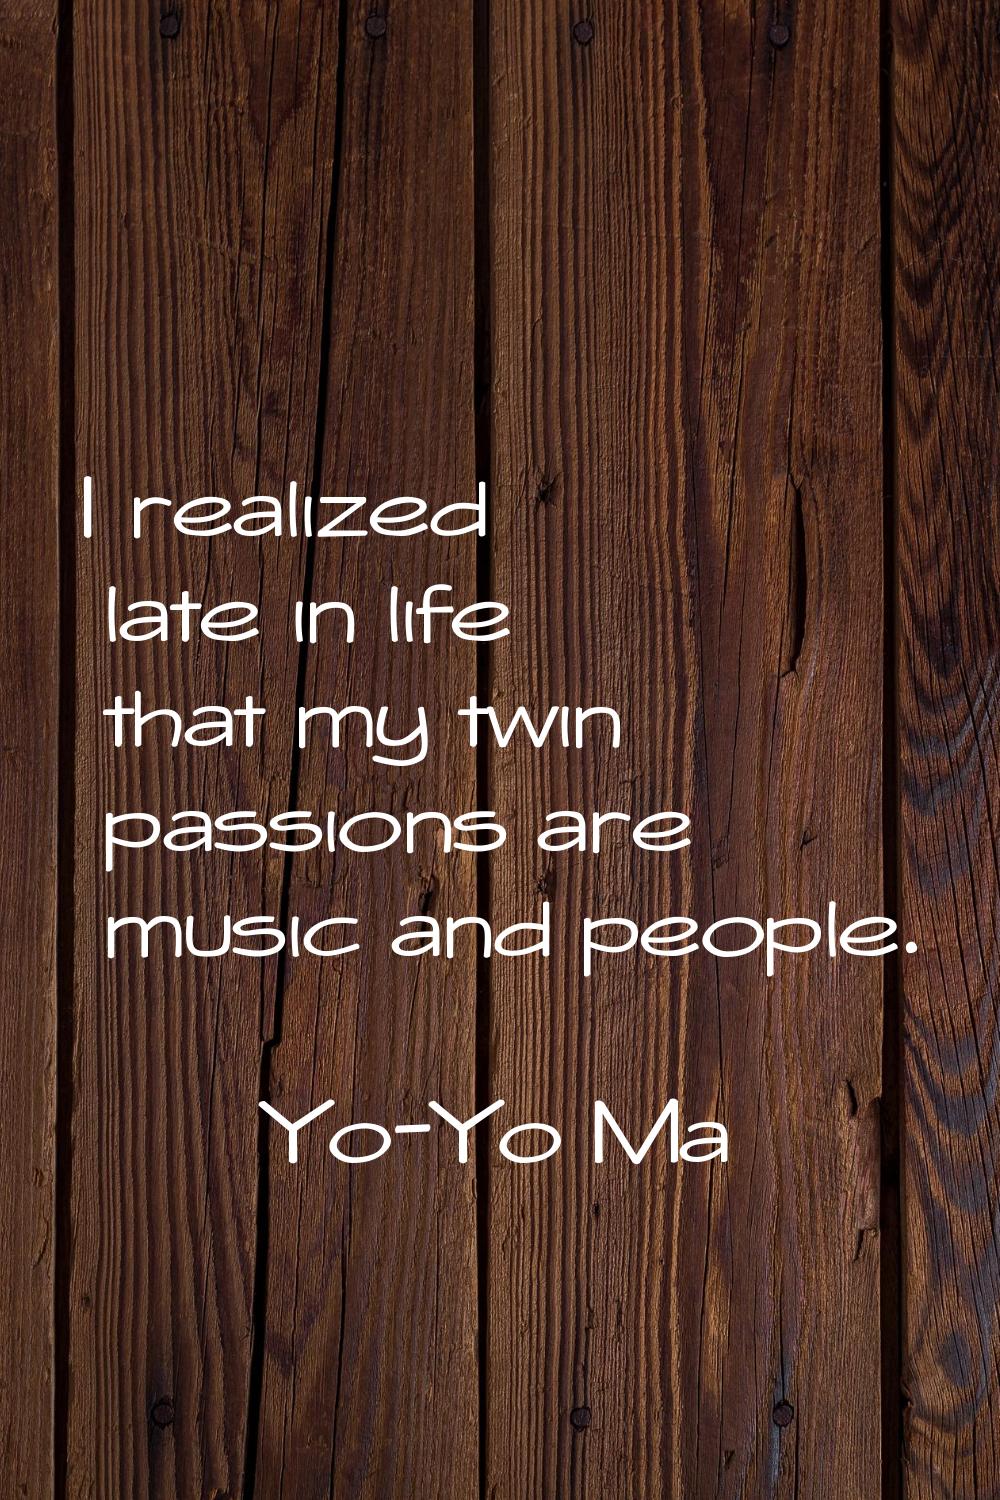 I realized late in life that my twin passions are music and people.